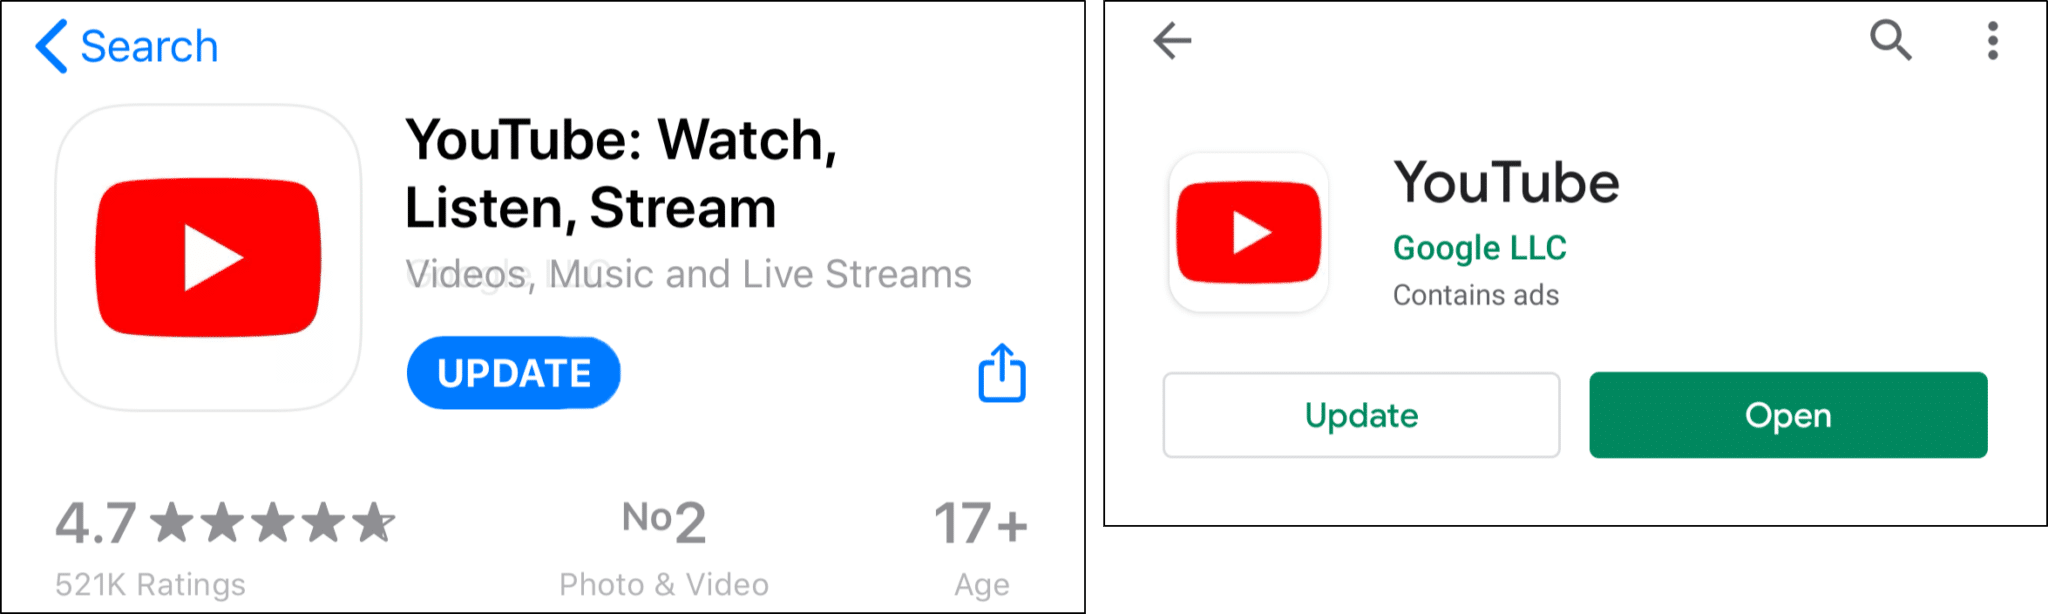 update the YouTube app to fix YouTube scrolling lag or glitch